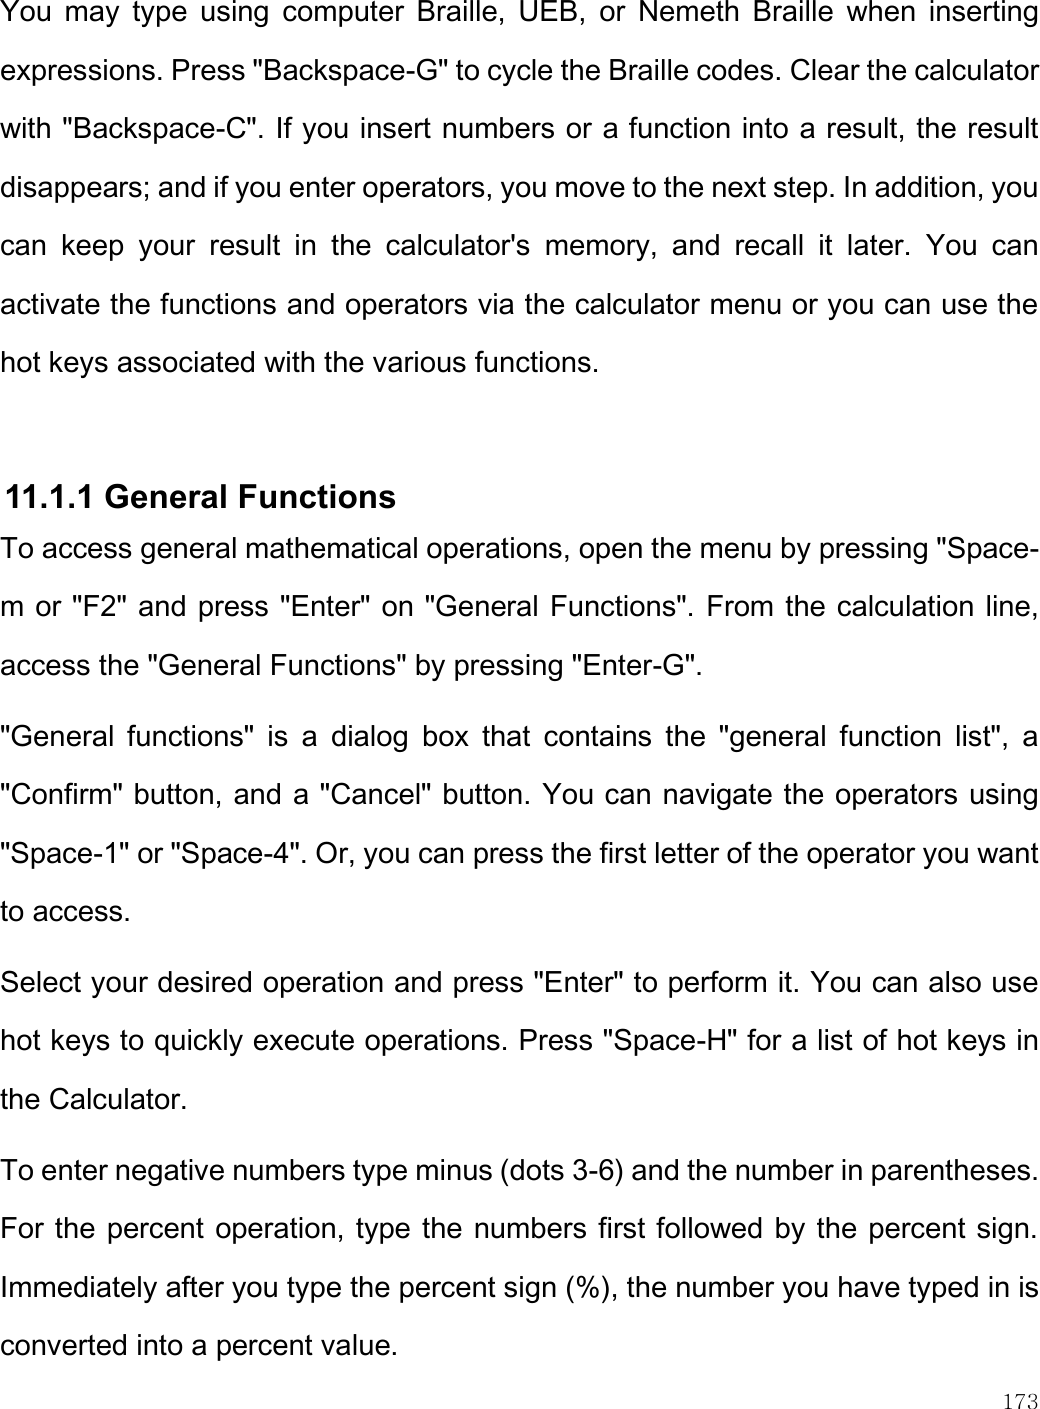    173  You  may  type  using  computer  Braille,  UEB,  or  Nemeth  Braille  when  inserting expressions. Press &quot;Backspace-G&quot; to cycle the Braille codes. Clear the calculator with &quot;Backspace-C&quot;. If you insert numbers or a function into a result, the result disappears; and if you enter operators, you move to the next step. In addition, you can  keep  your  result  in  the  calculator&apos;s  memory,  and  recall  it  later.  You  can activate the functions and operators via the calculator menu or you can use the hot keys associated with the various functions.   11.1.1 General Functions To access general mathematical operations, open the menu by pressing &quot;Space-m or &quot;F2&quot; and press &quot;Enter&quot; on &quot;General Functions&quot;. From the calculation line, access the &quot;General Functions&quot; by pressing &quot;Enter-G&quot;.  &quot;General  functions&quot;  is  a  dialog  box  that  contains  the  &quot;general  function  list&quot;,  a &quot;Confirm&quot; button, and a &quot;Cancel&quot; button. You can navigate the operators using &quot;Space-1&quot; or &quot;Space-4&quot;. Or, you can press the first letter of the operator you want to access.  Select your desired operation and press &quot;Enter&quot; to perform it. You can also use hot keys to quickly execute operations. Press &quot;Space-H&quot; for a list of hot keys in the Calculator.  To enter negative numbers type minus (dots 3-6) and the number in parentheses. For the percent operation, type the numbers first followed by the percent sign. Immediately after you type the percent sign (%), the number you have typed in is converted into a percent value.  